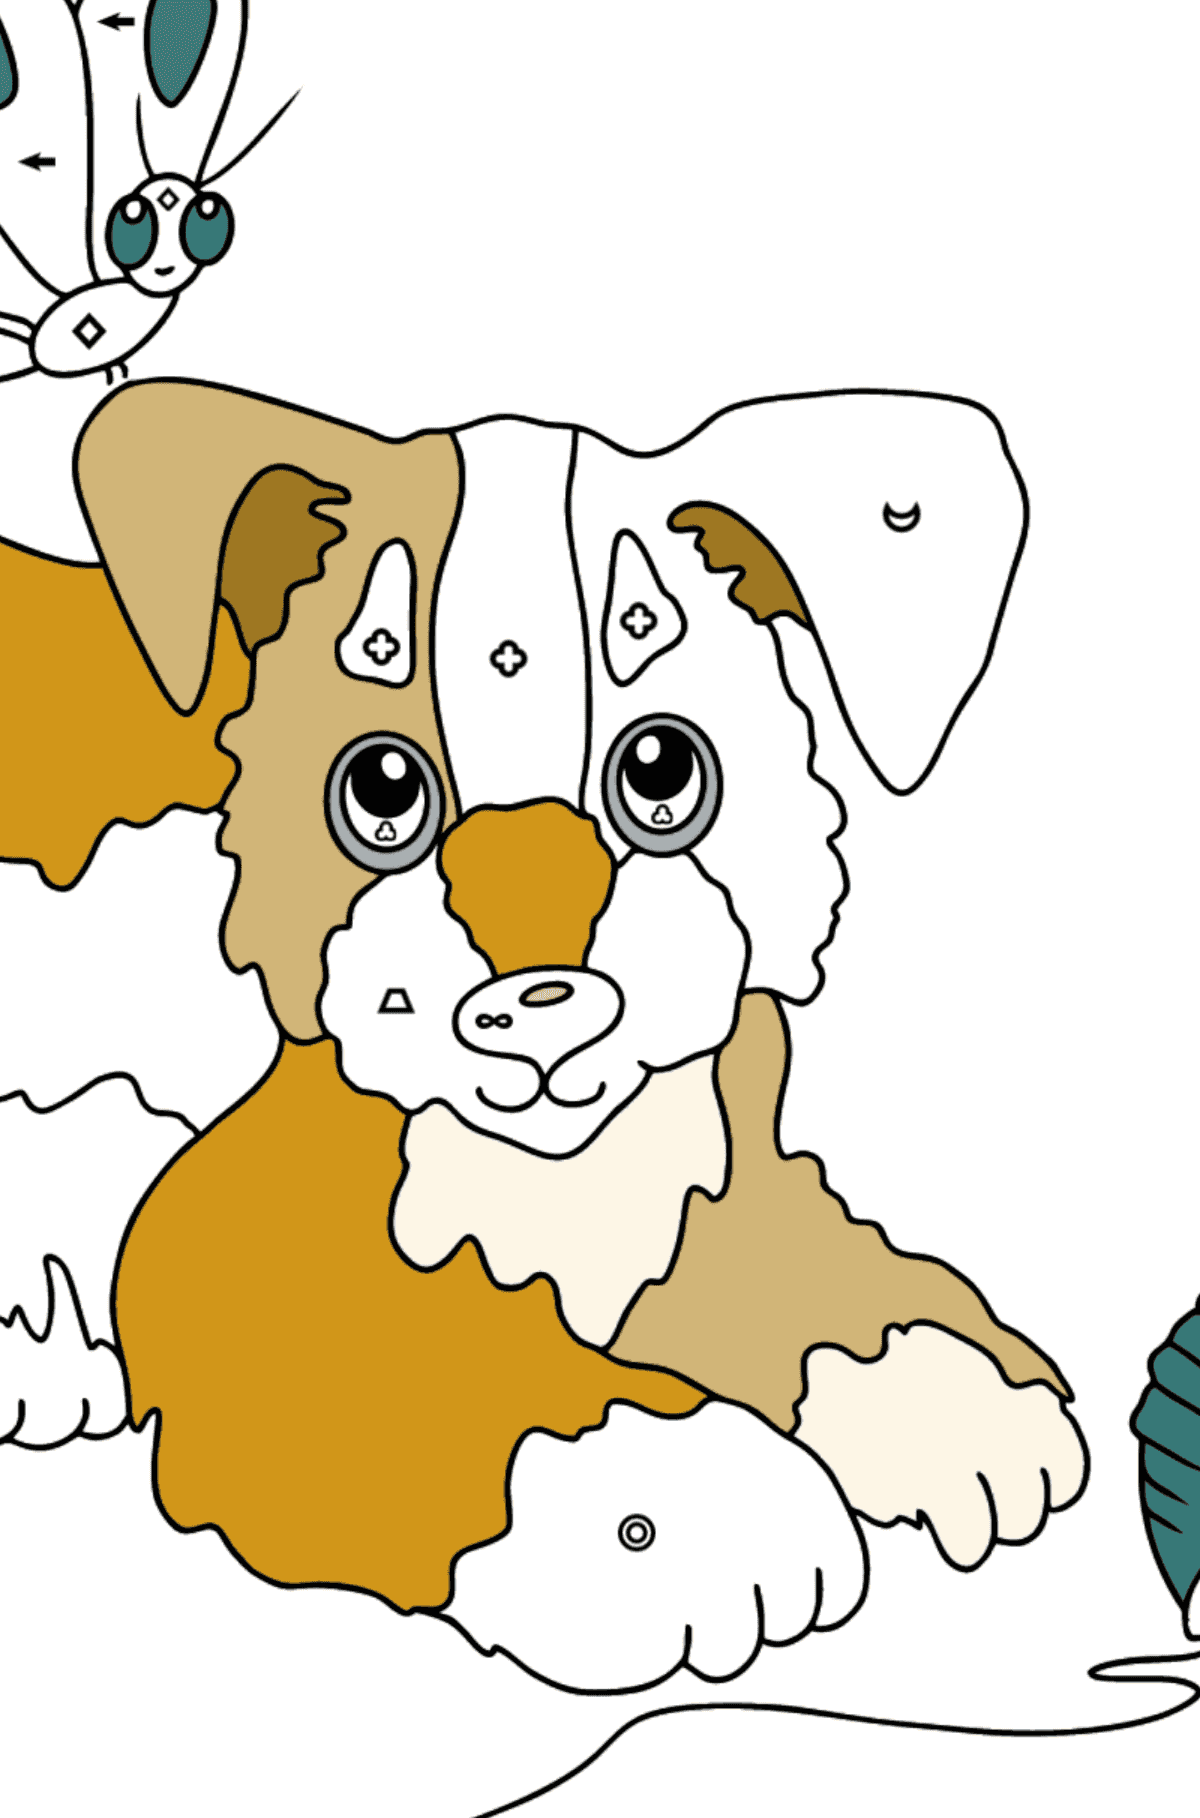 Coloring Page - A Dog is Playing with a Ball of Yarn and Butterflies - Coloring by Symbols and Geometric Shapes for Kids